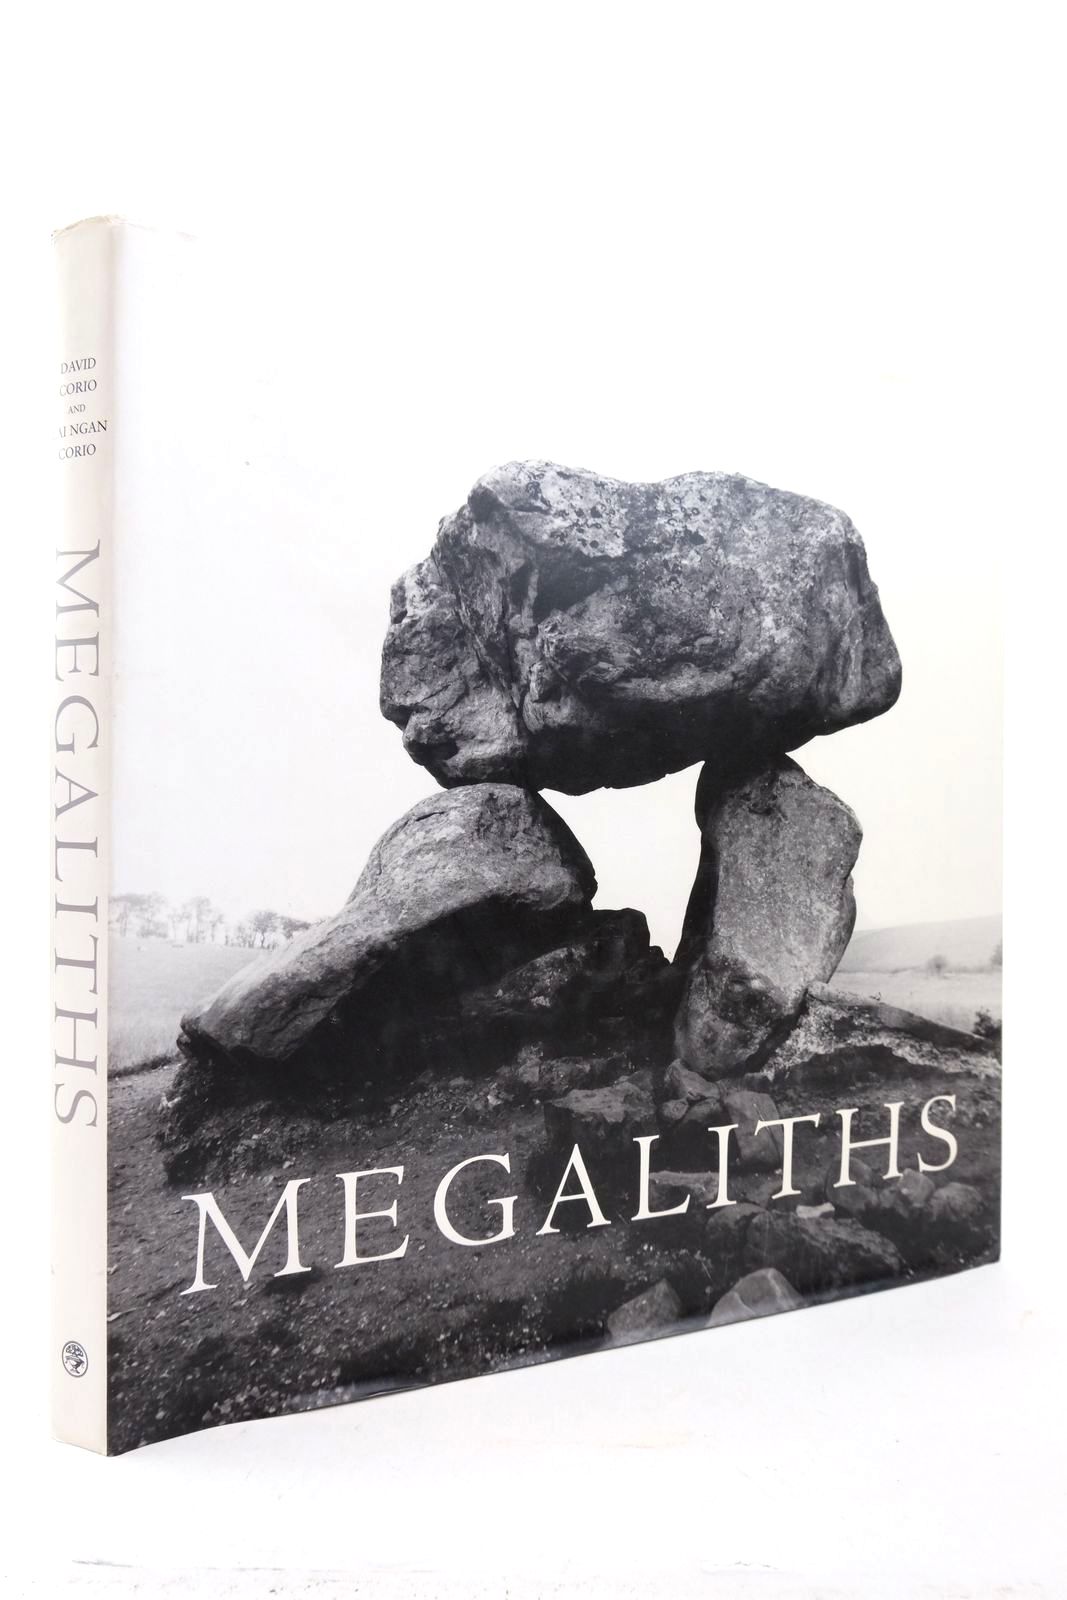 Photo of MEGALITHS: THE ANCIENT STONE MONUMENTS OF ENGLAND AND WALES written by Corio, Lai Ngan published by Jonathan Cape (STOCK CODE: 2140821)  for sale by Stella & Rose's Books